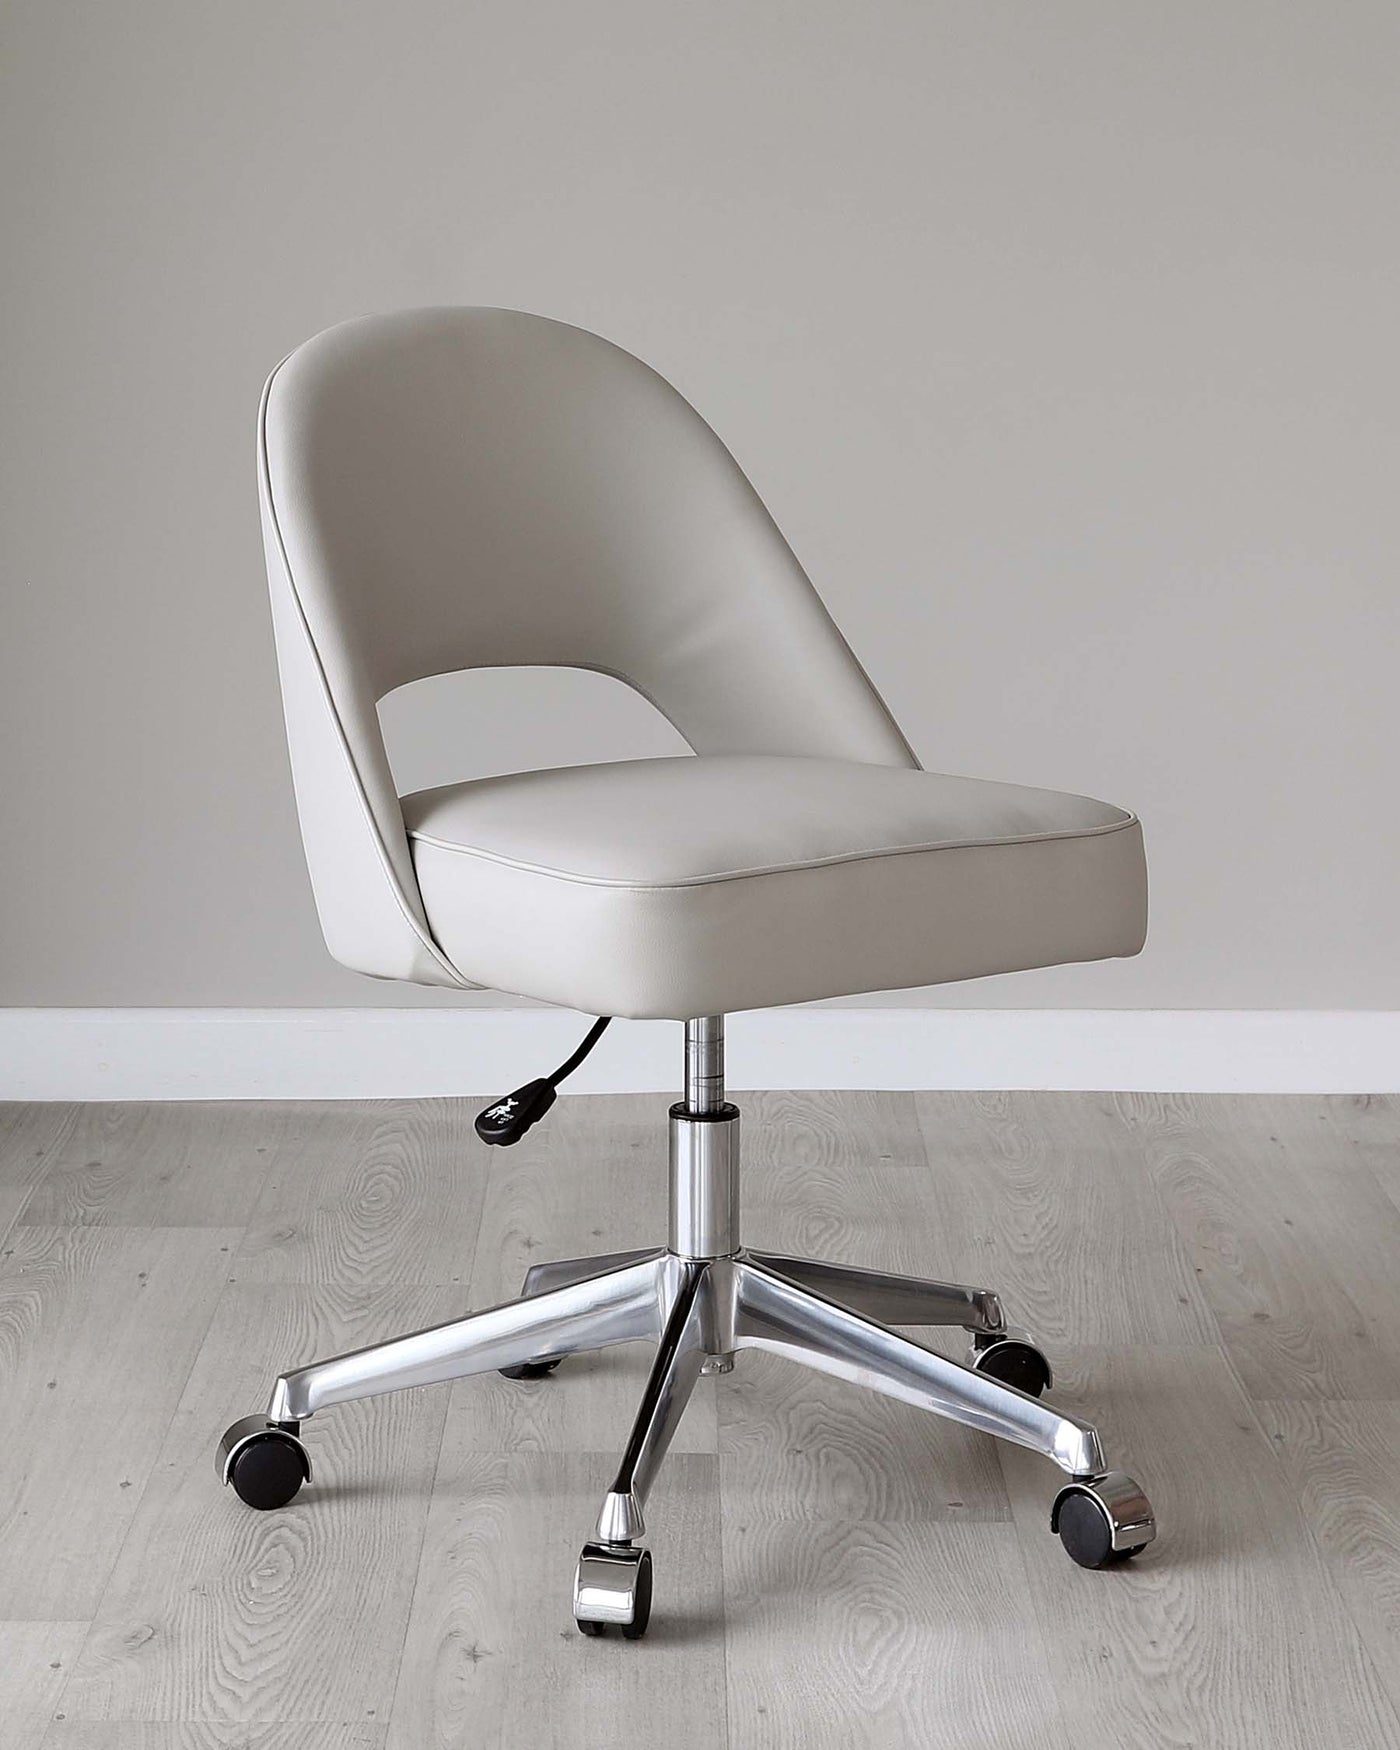 Modern office chair with a sleek design, featuring a high back, gently curved seat in a light grey upholstery, and a chrome five-star base with caster wheels for easy mobility.